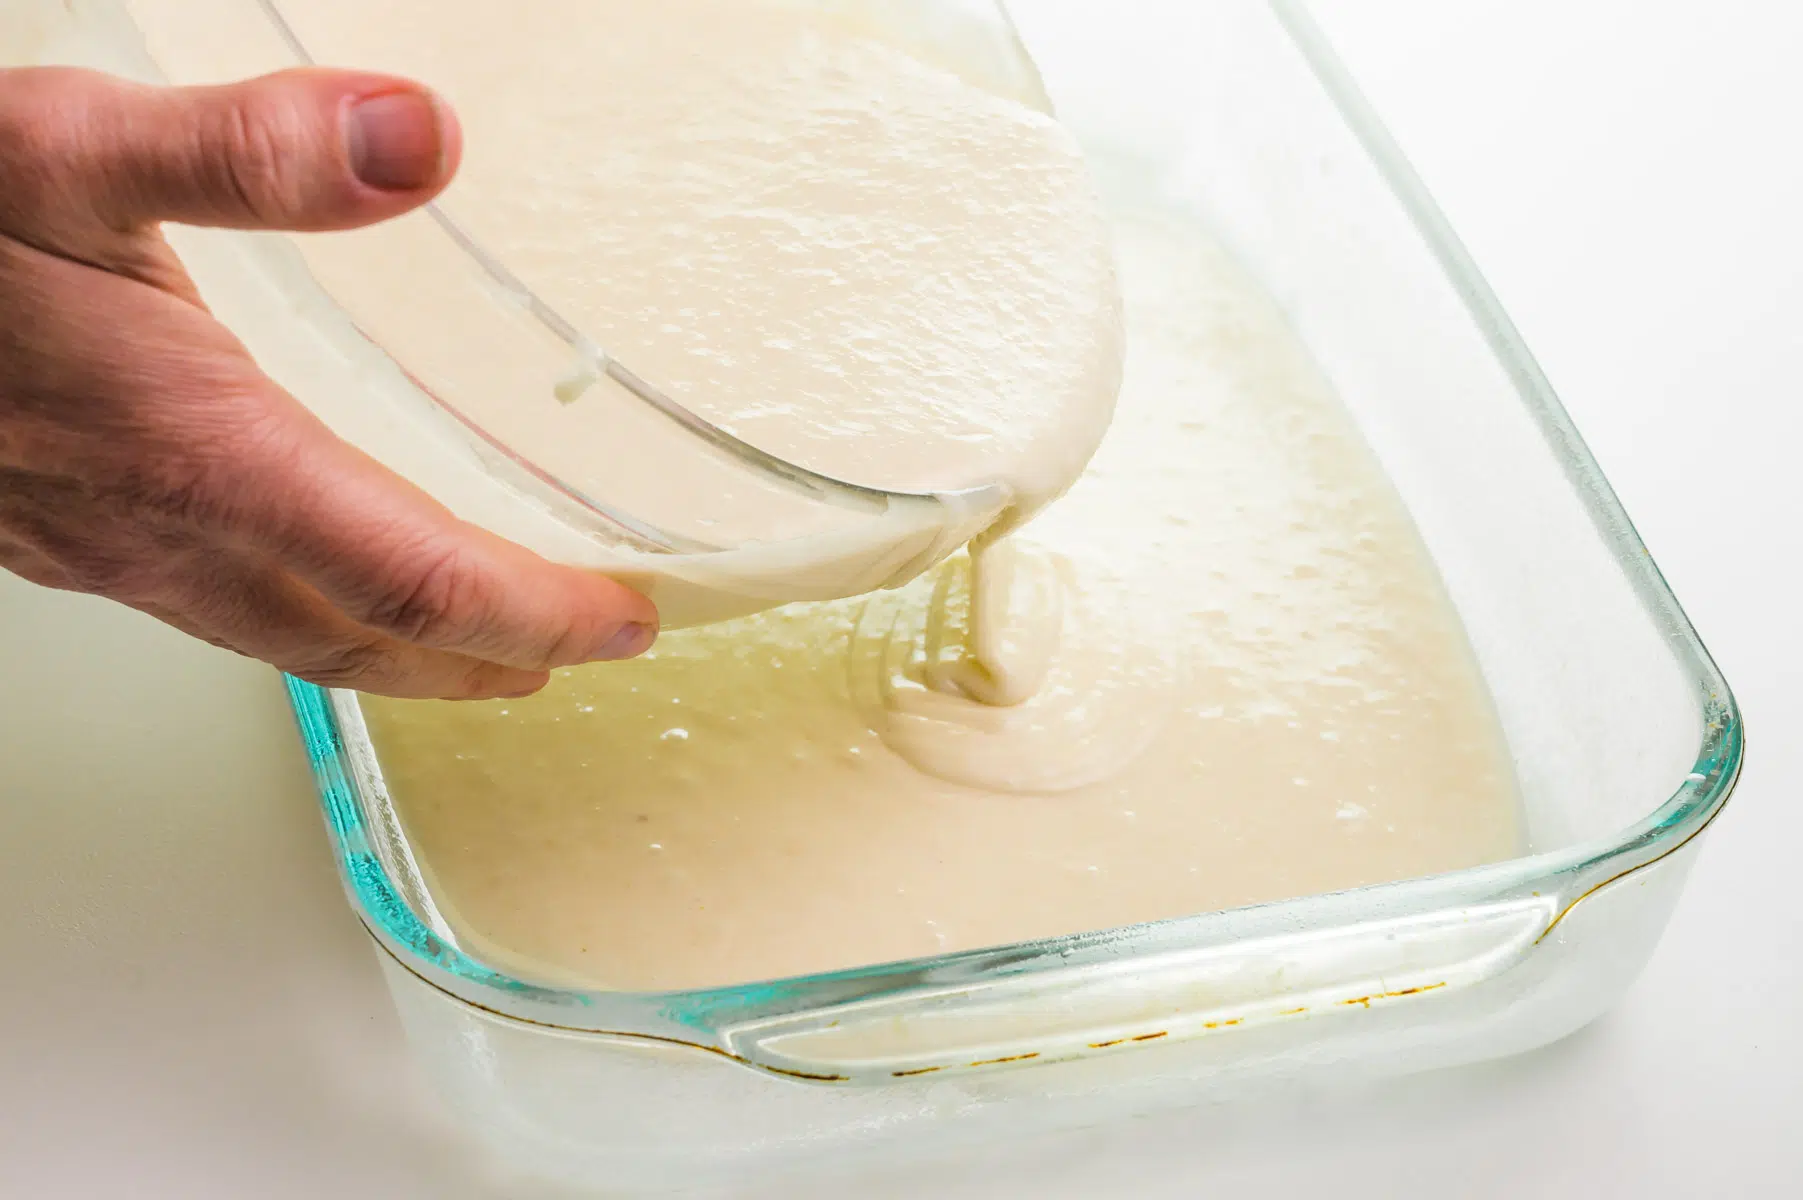 A hand holds a bowl, pouring cake batter into a glass baking dish.